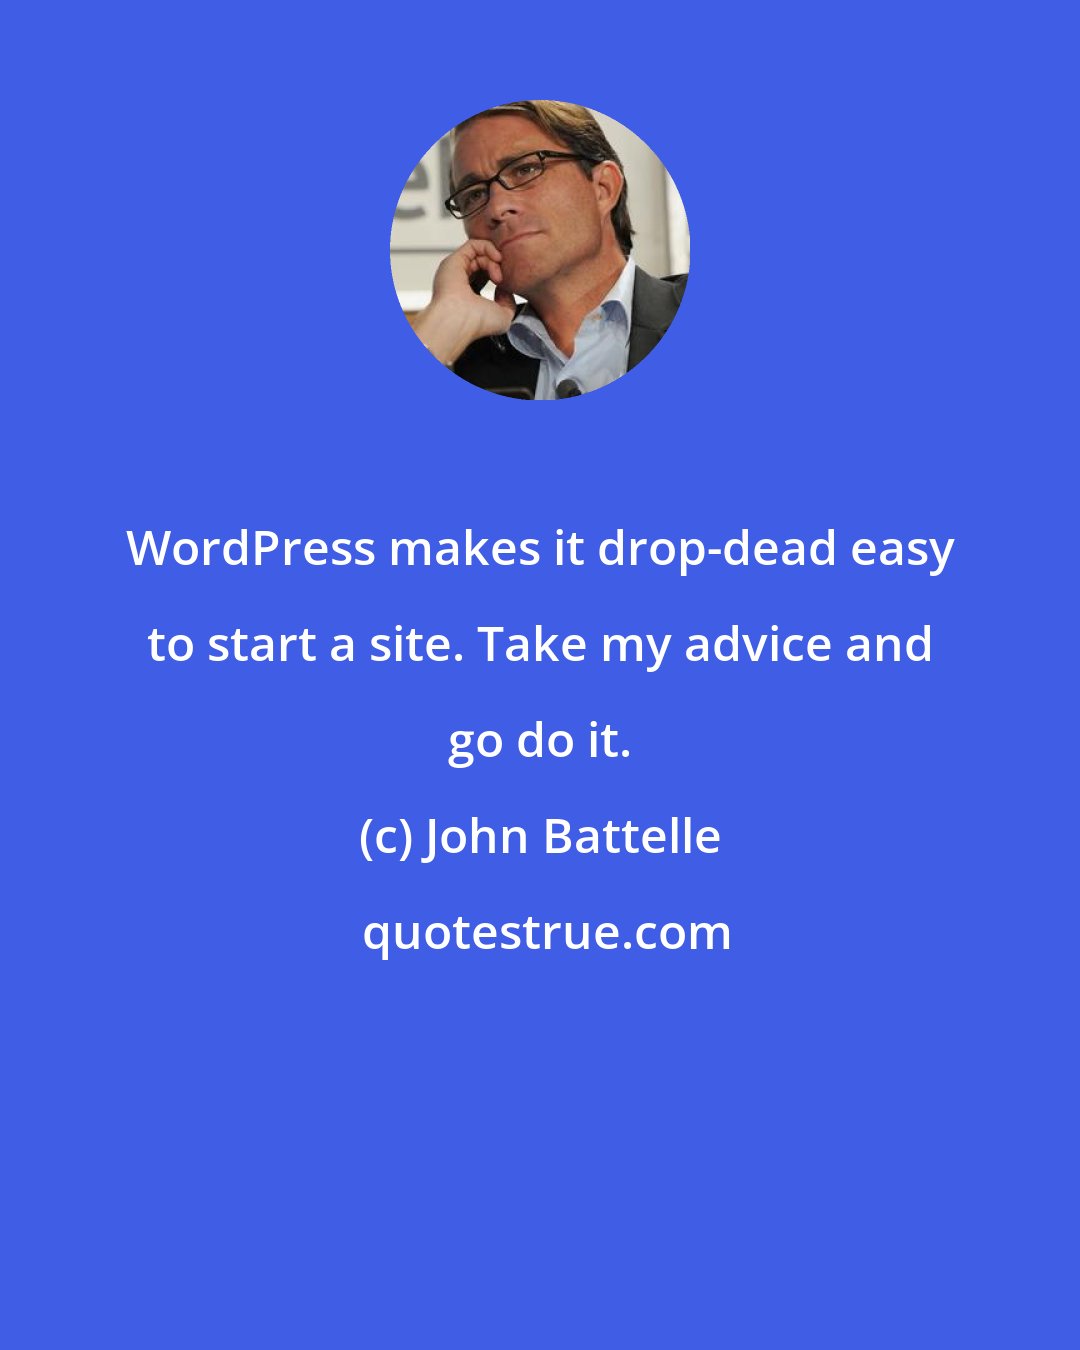 John Battelle: WordPress makes it drop-dead easy to start a site. Take my advice and go do it.